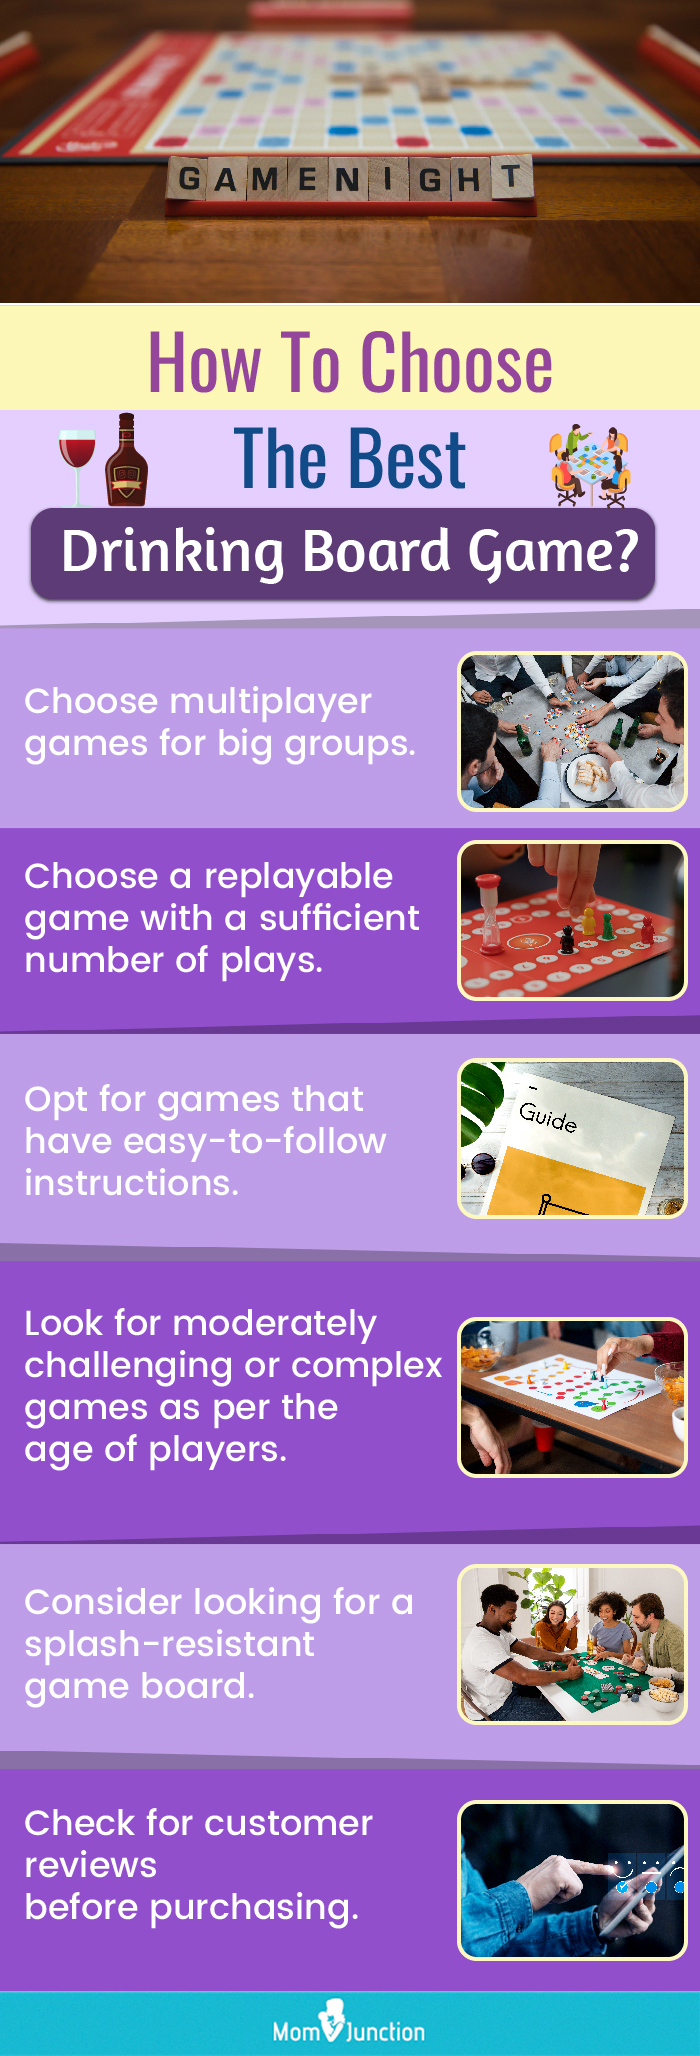 How To Choose The Best Drinking Board Game? (infographic)